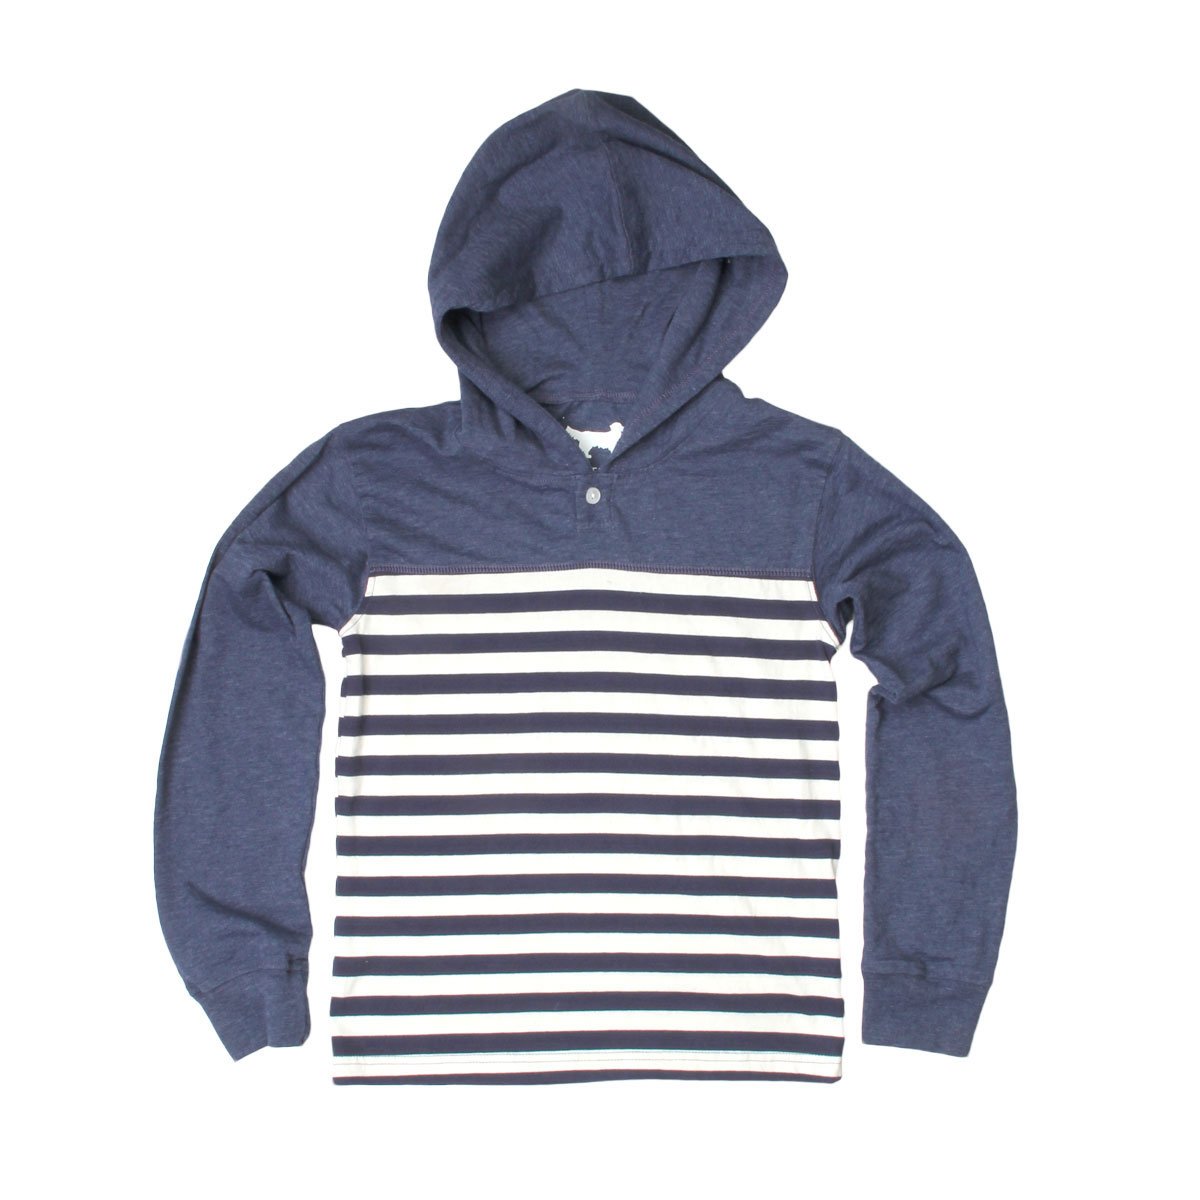 Boys Striped Henley By Jack Thomas - The Boy's Store